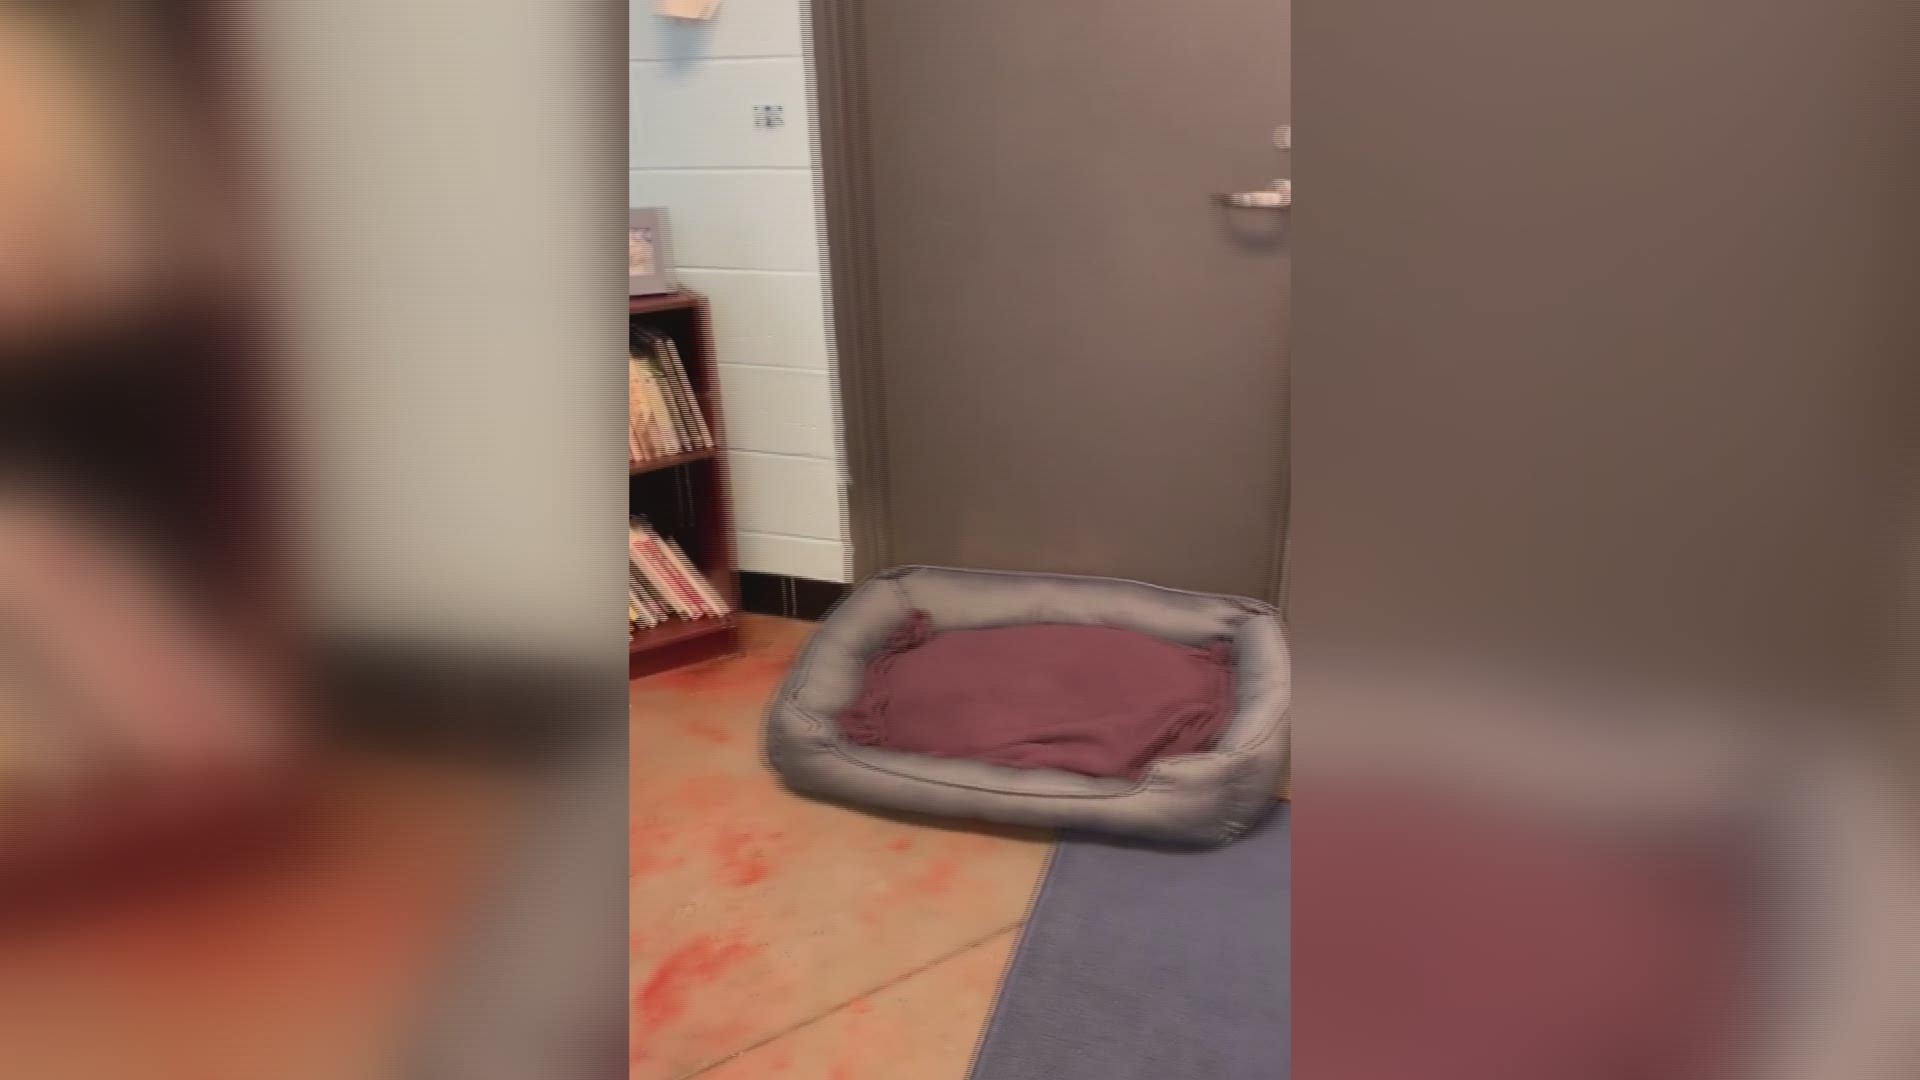 The county animal shelter creates a room to help dogs combat stress.